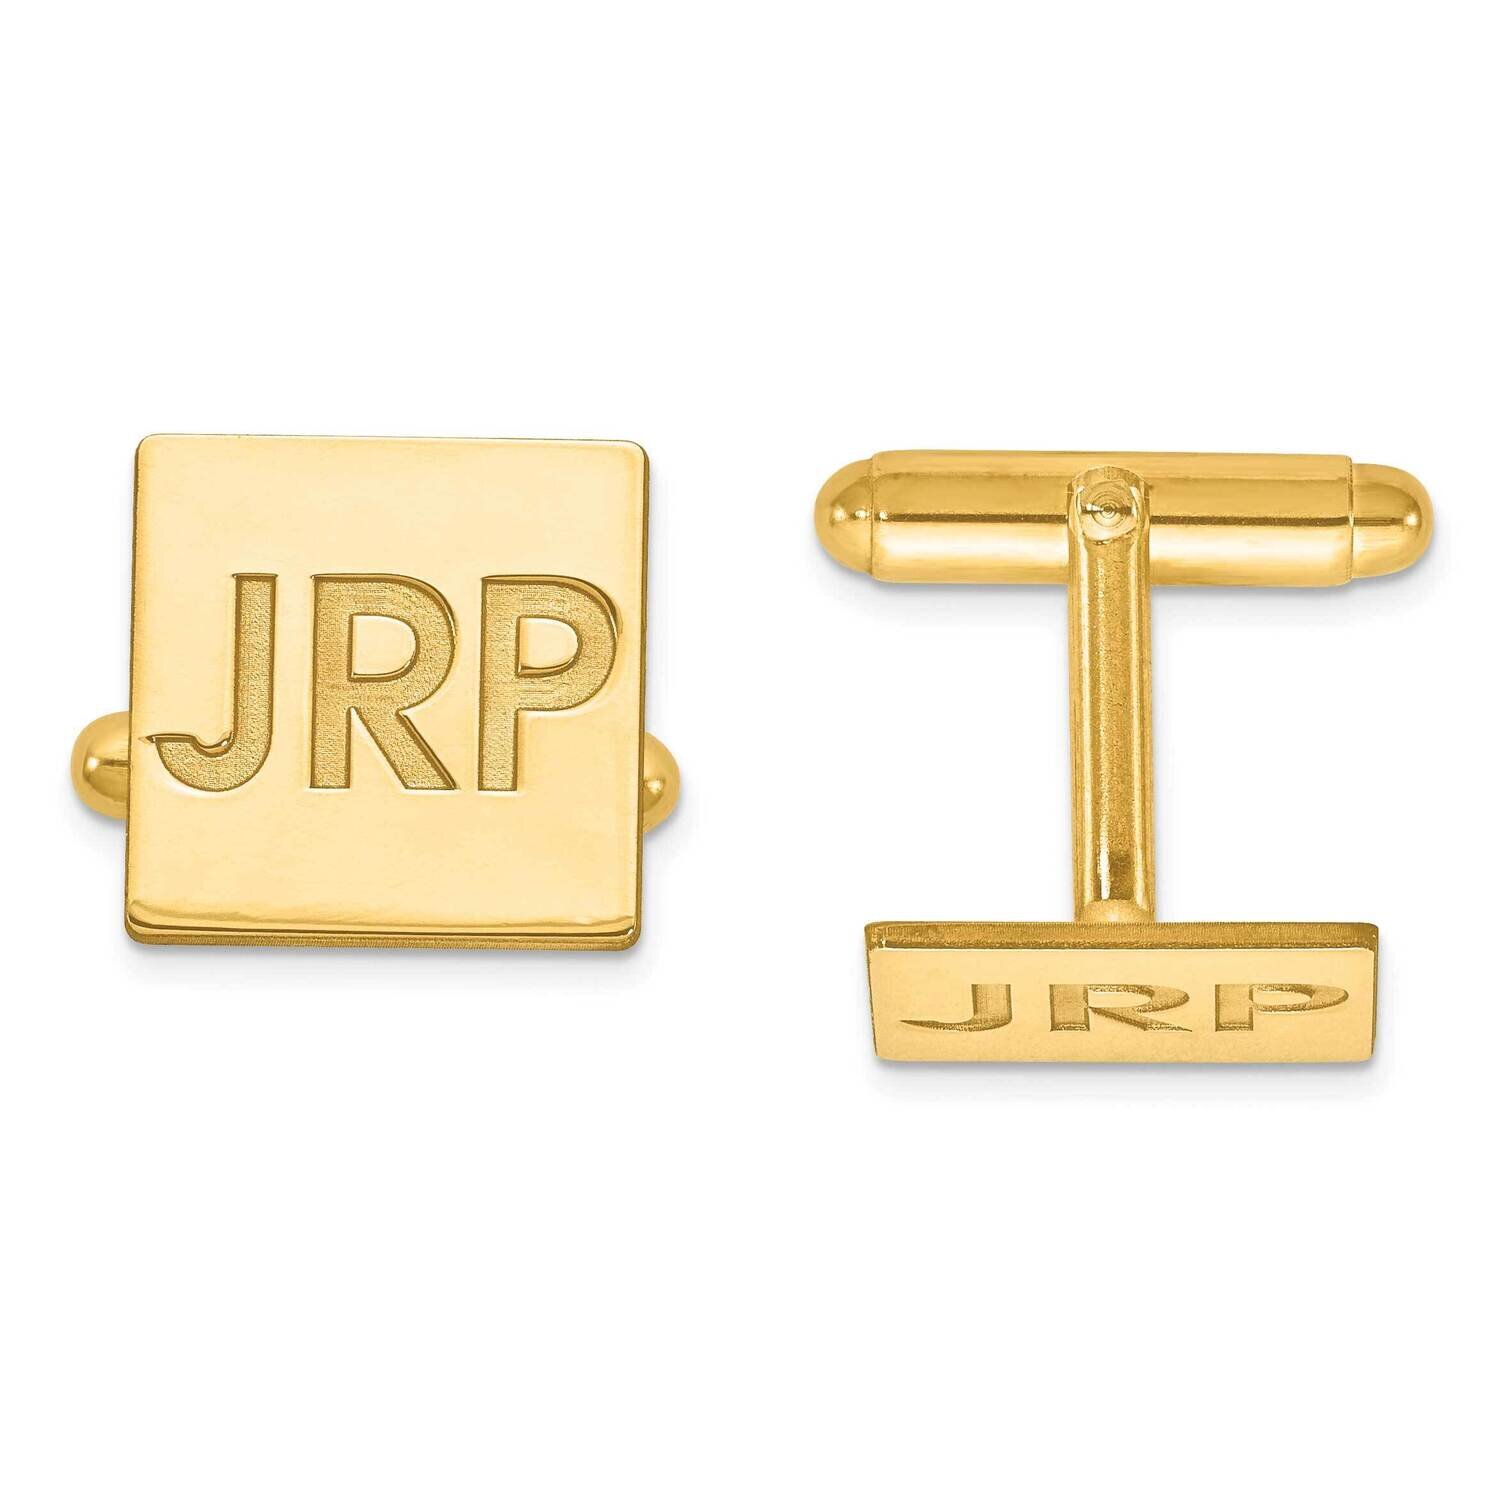 Recessed Letters Square Monogram Cuff Links 14k Gold XNA611Y